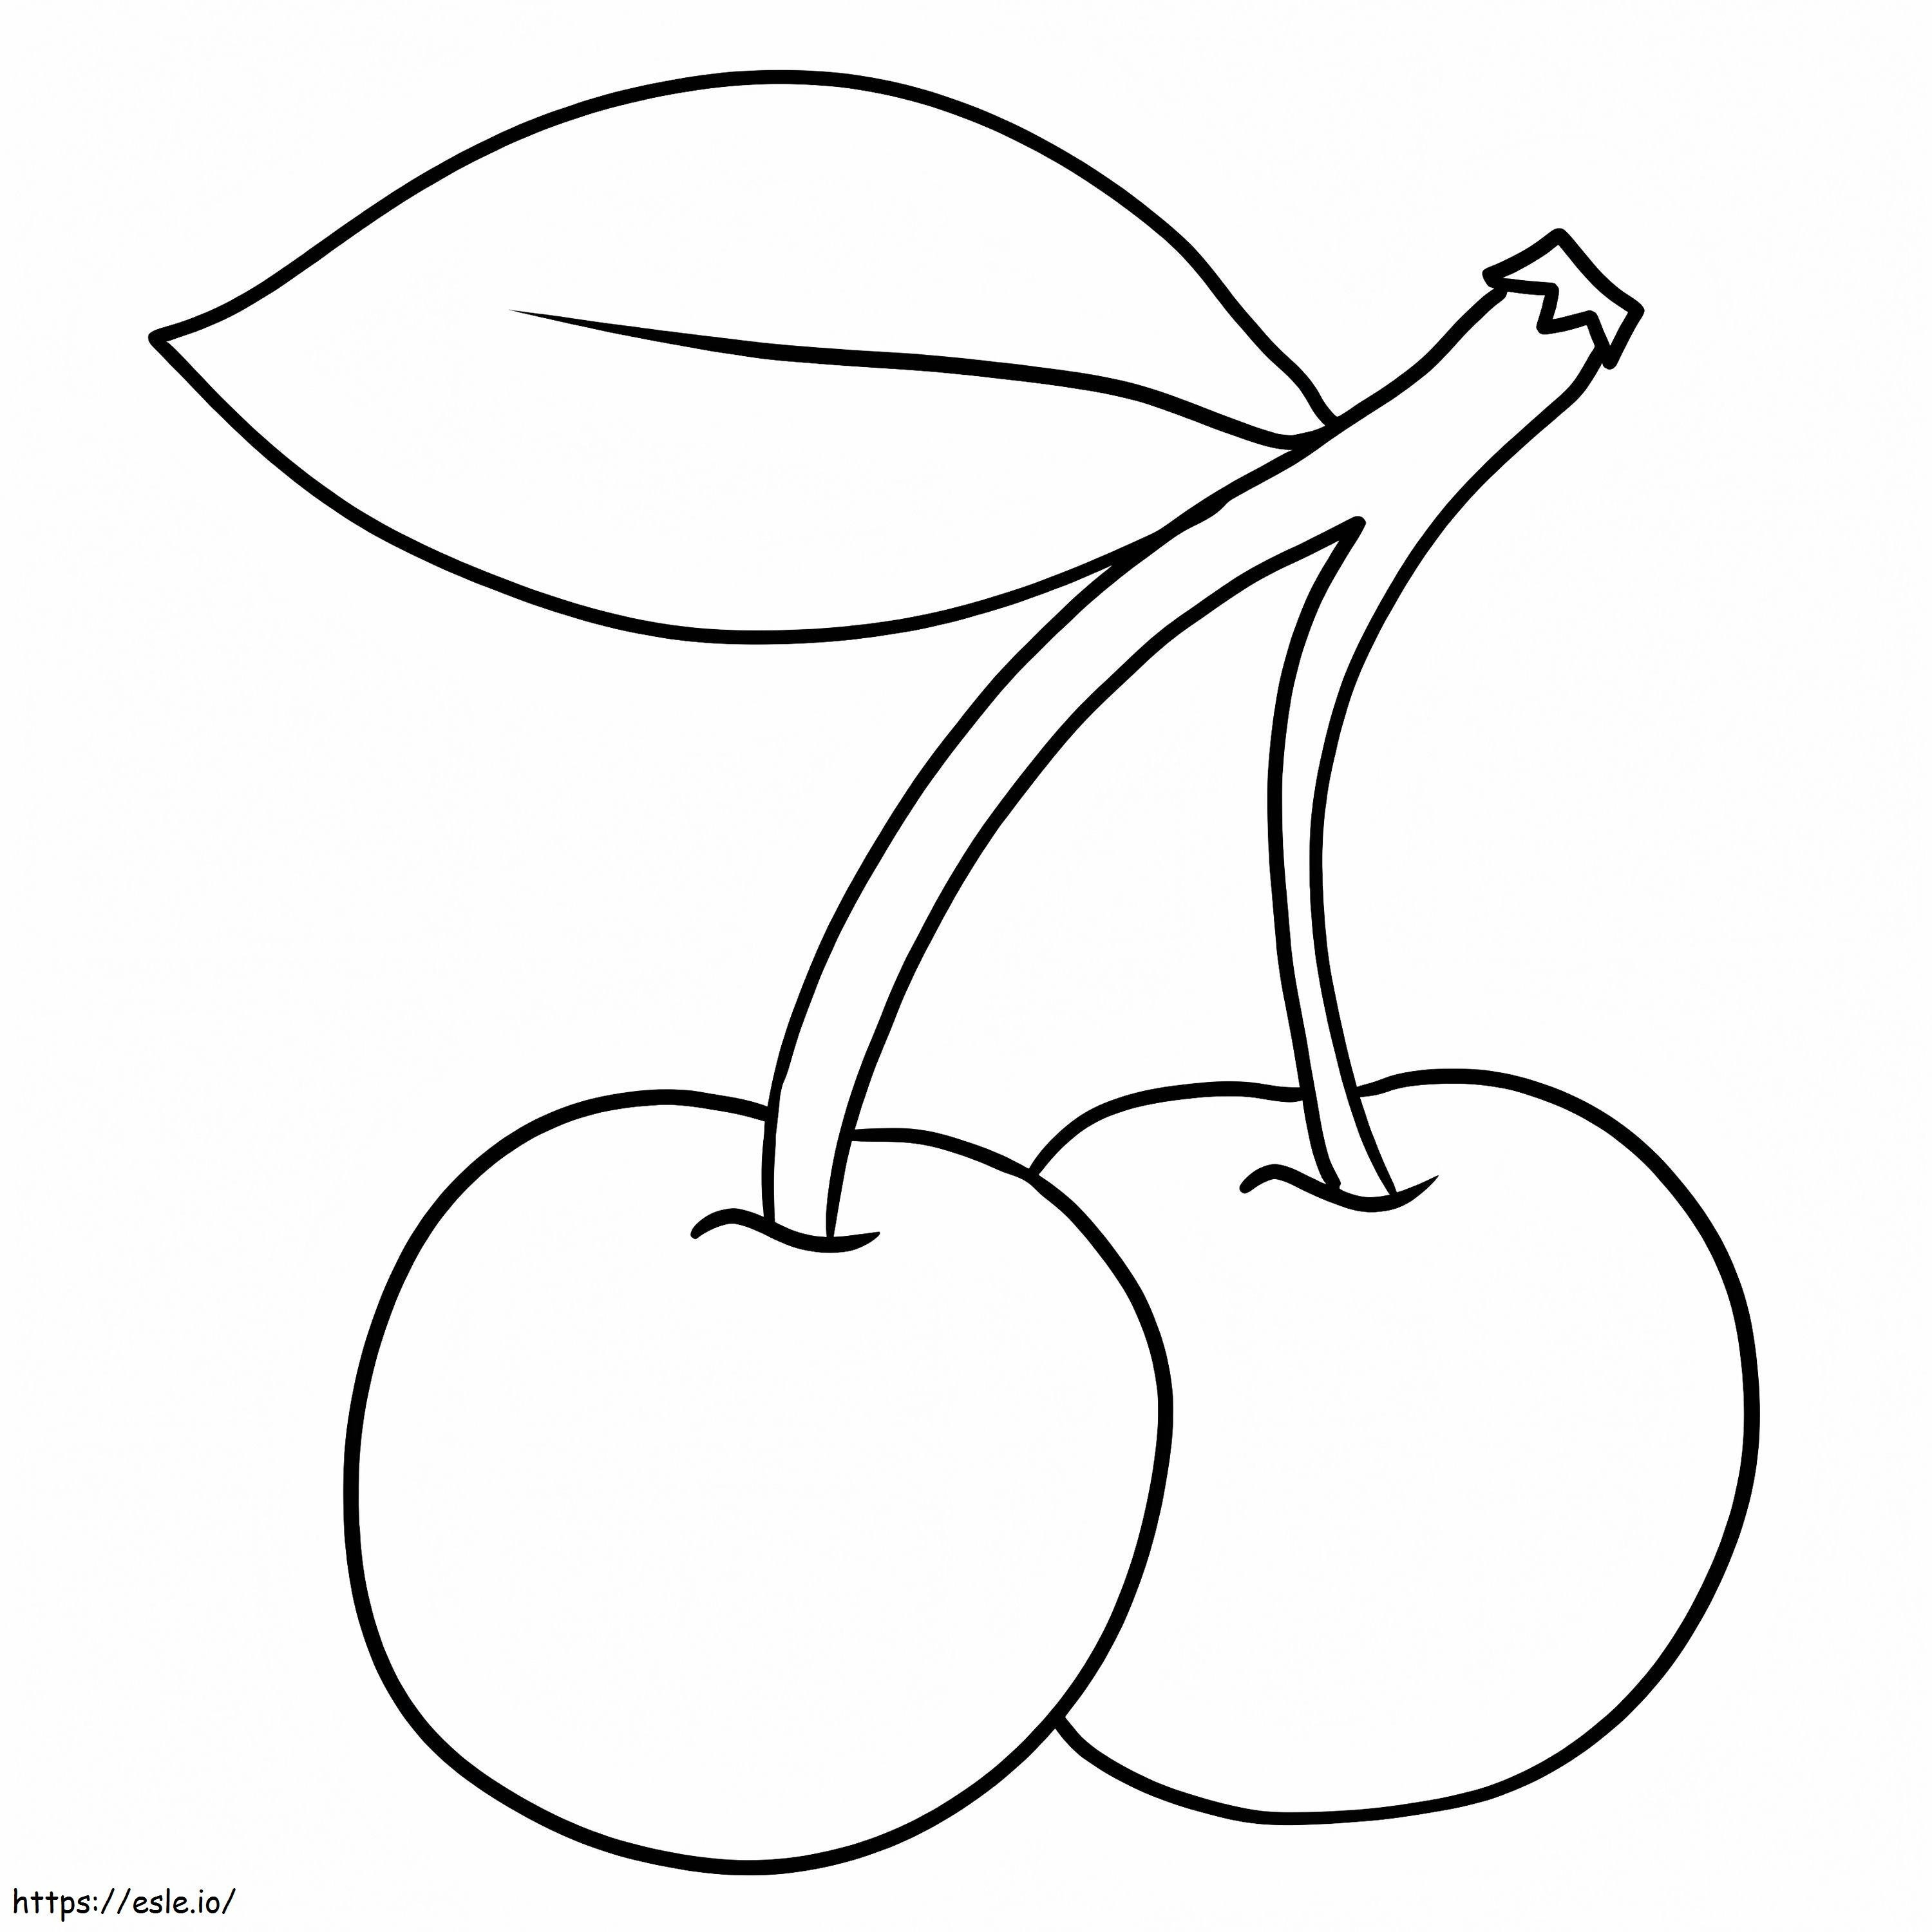 Big Cherry coloring page